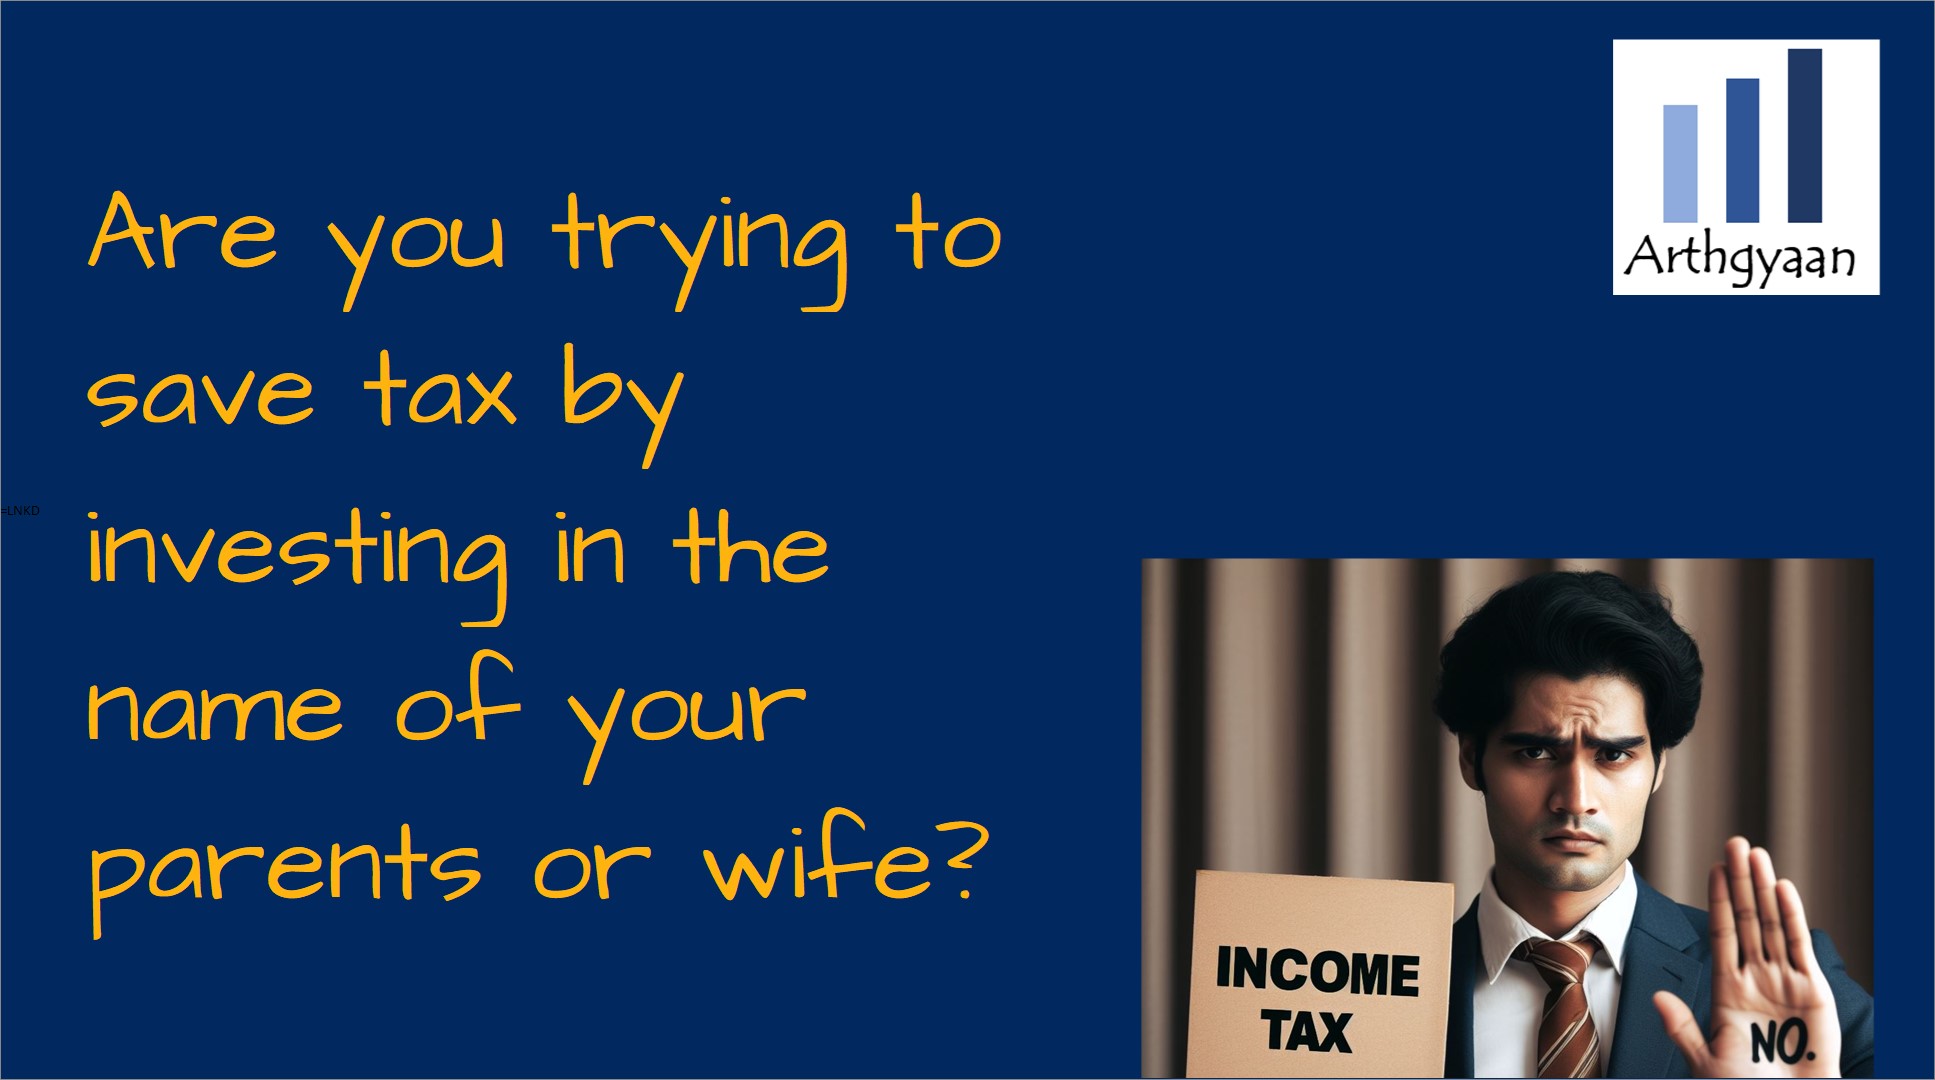 Income clubbing: Are you trying to save tax by investing in the name of your parents or wife?